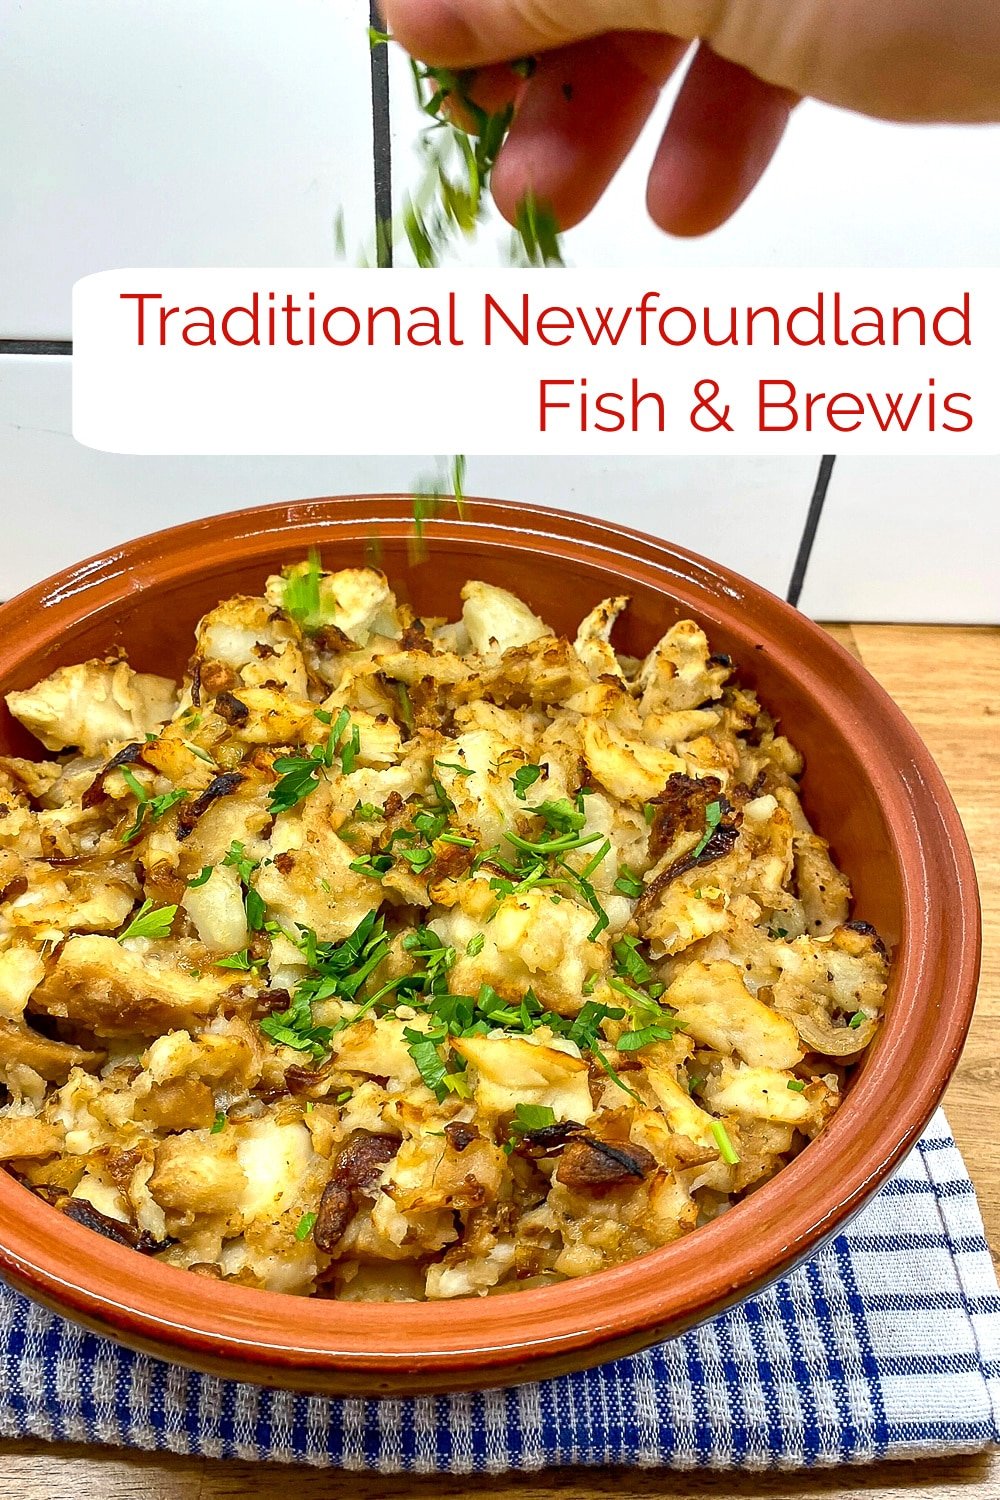 Fish and Brewis photo with title text added for Pinterest